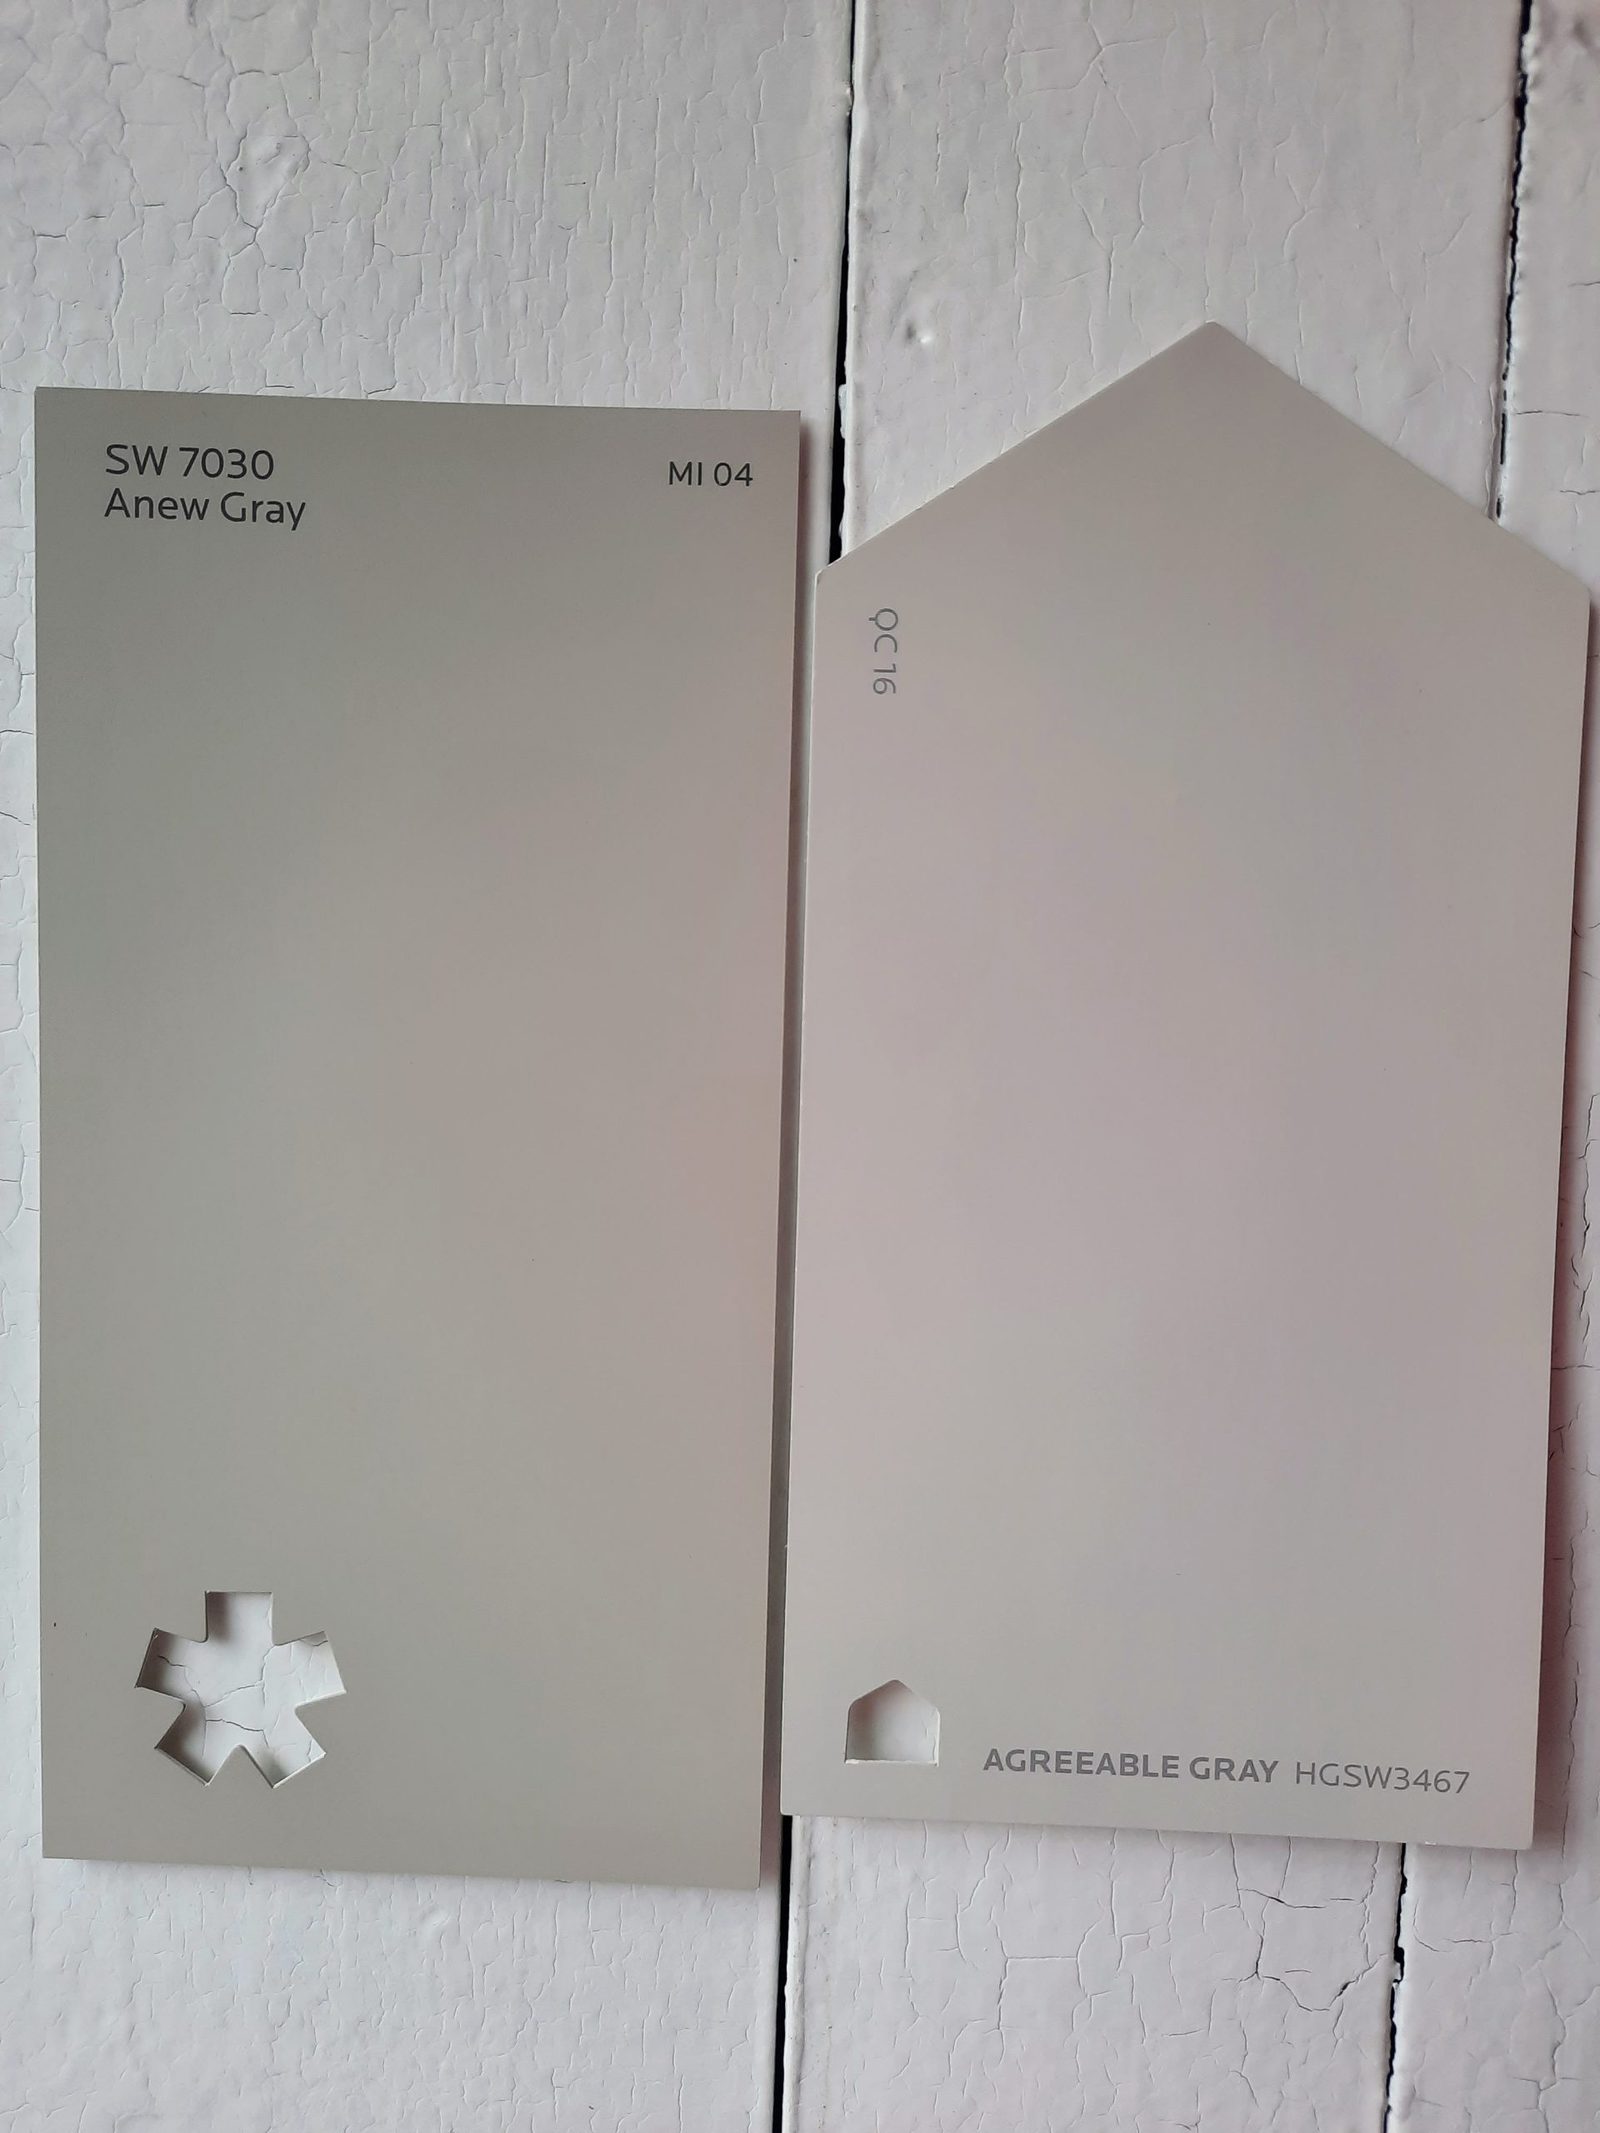 5 Anew Gray vs Agreeable Gray scaled